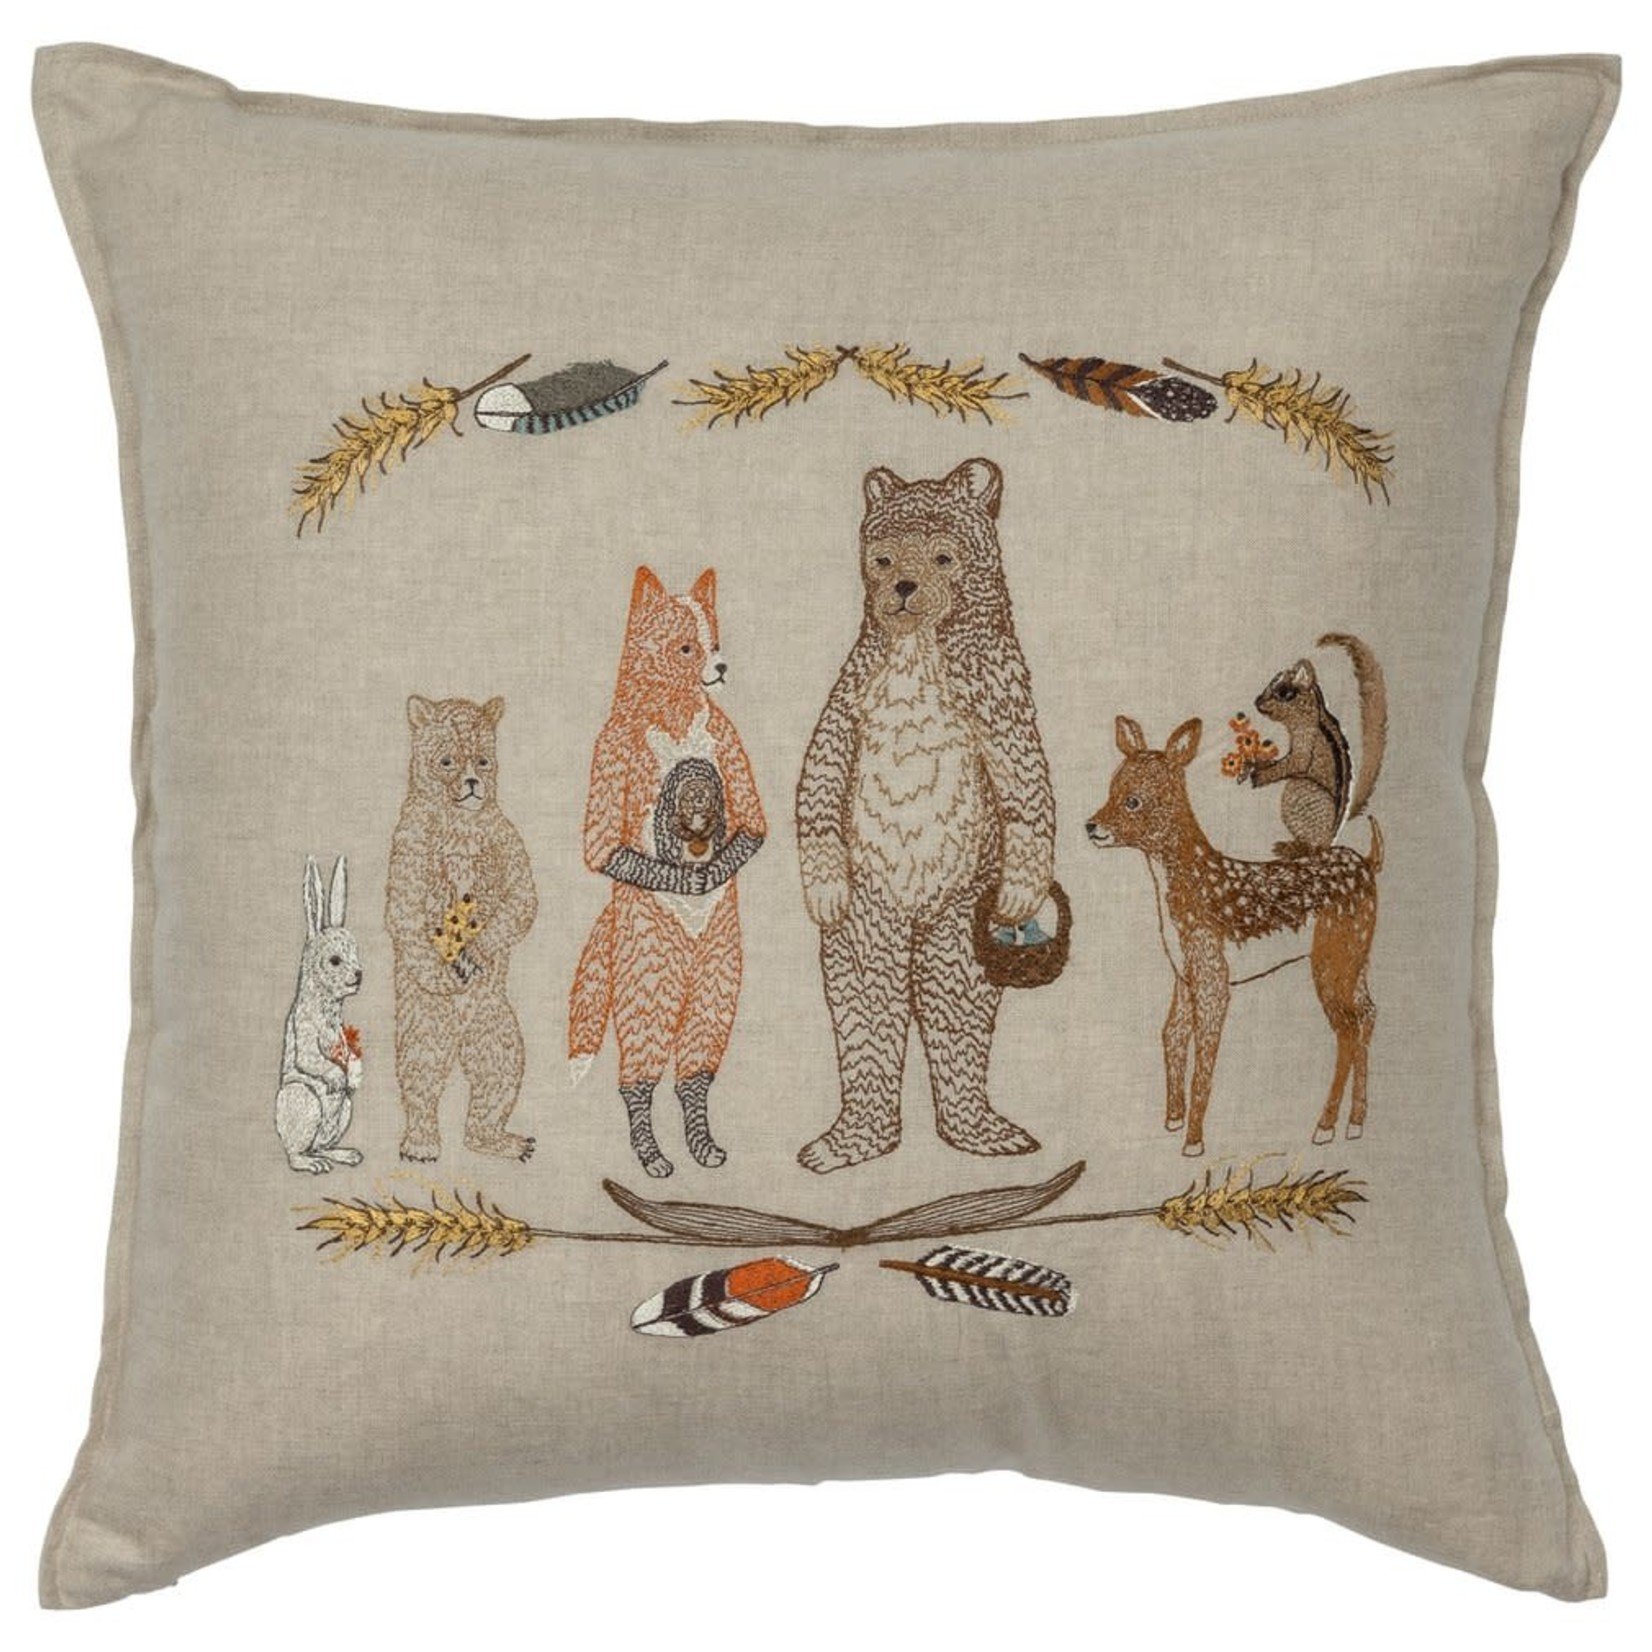 Pillows - Embroidered Woodland Welcome Pillow